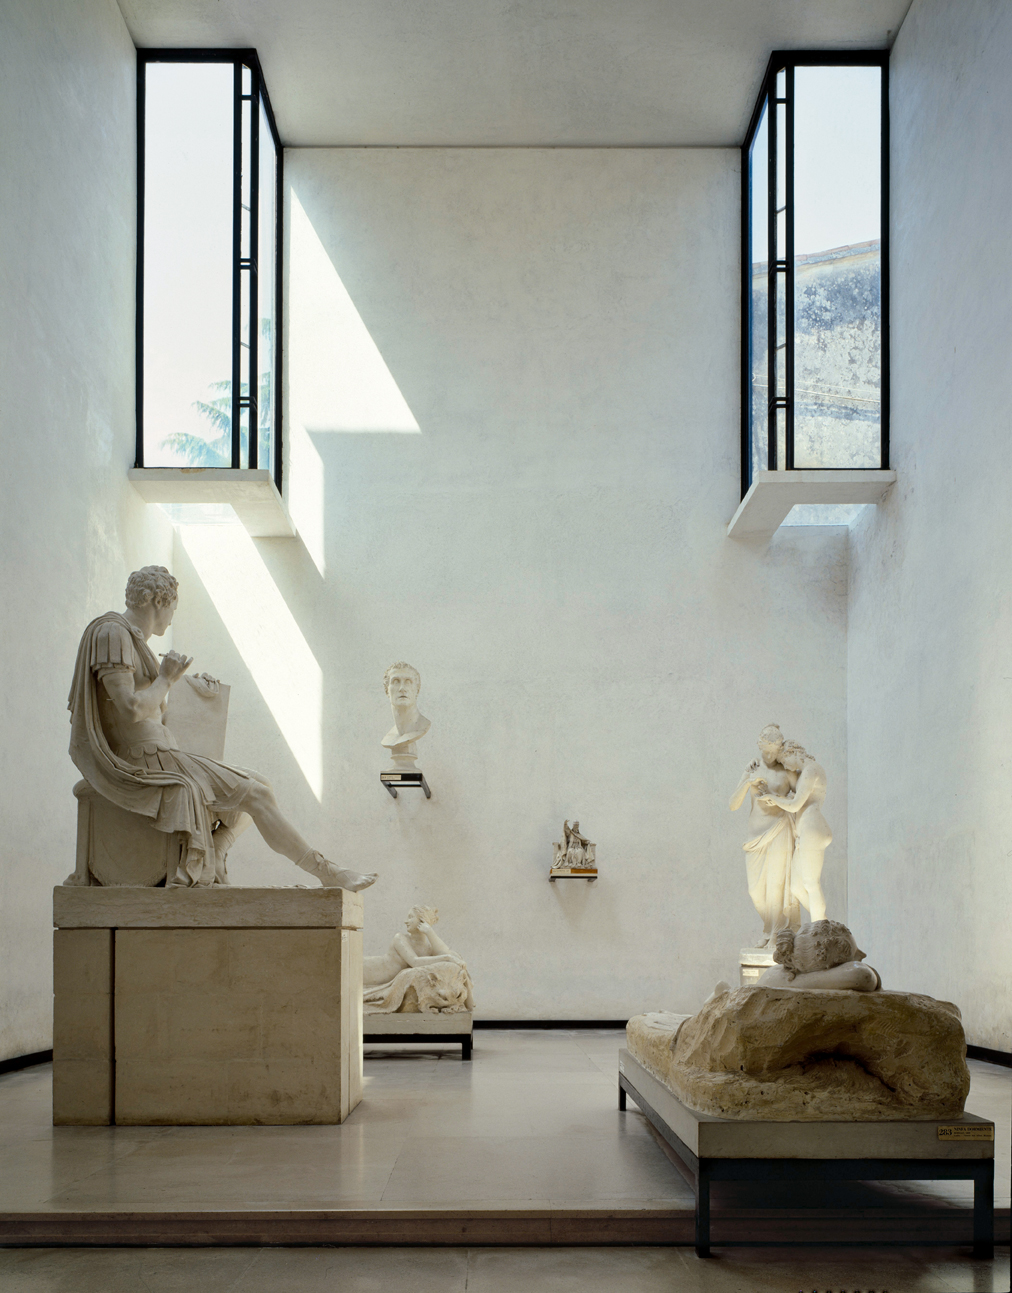 Gipsoteca Canoviana addition, Possagno, 1955-57; western gallery with two inwardly projecting, steel-framed windows. Canova’s Sleeping Nymph lies in the foreground (r), with George Washington in Roman attire (l). © Klaus Frahm/ARTUR IMAGES 